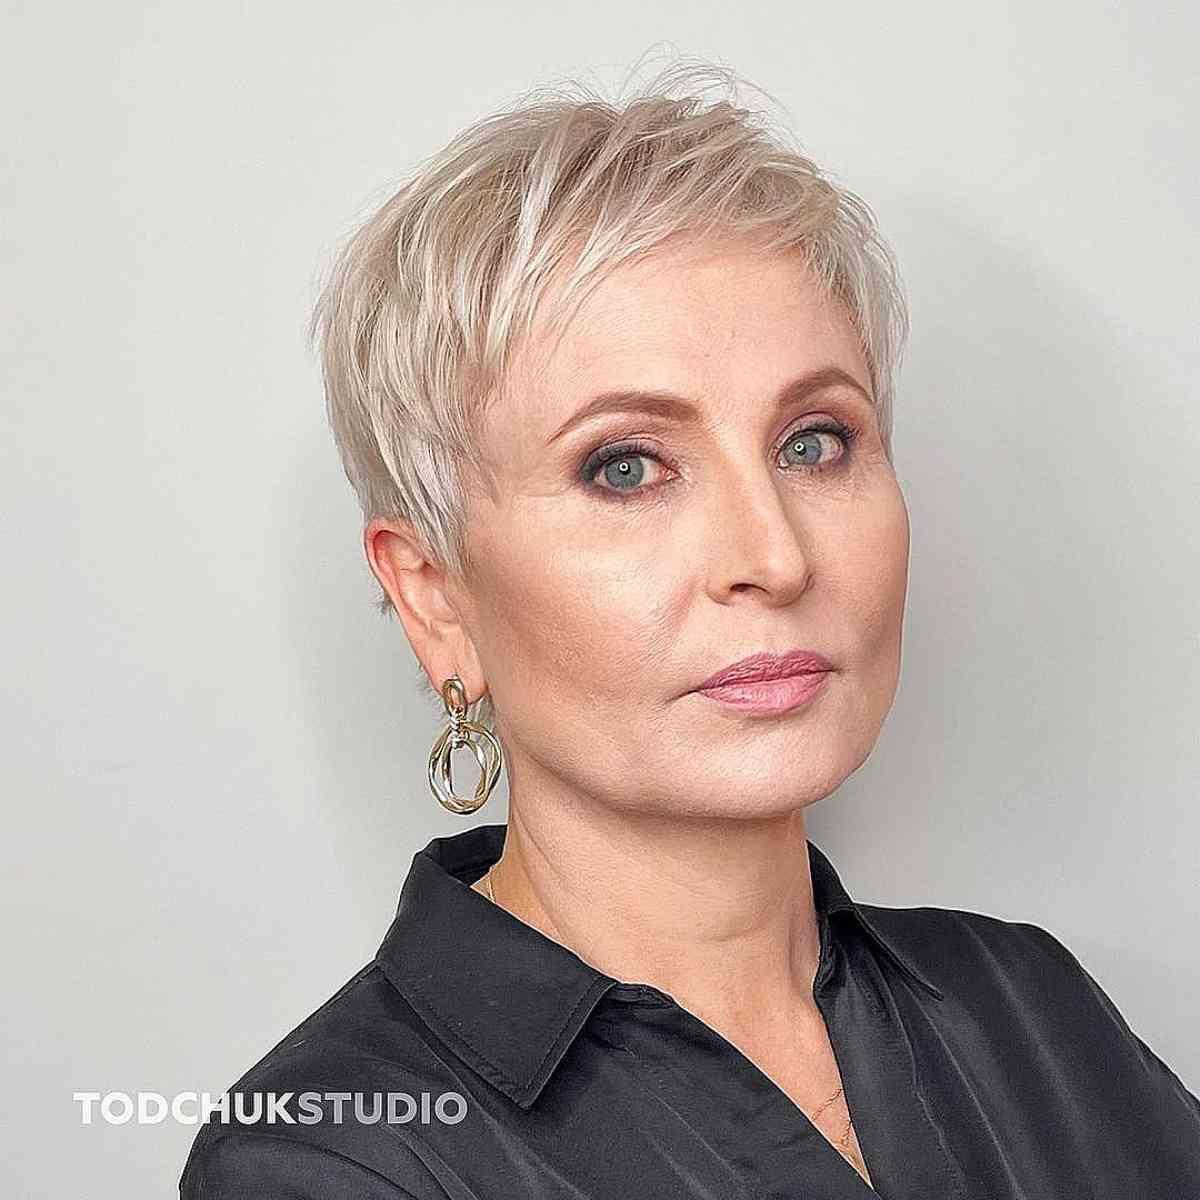 Flattering short haircut for women over 50 with round faces